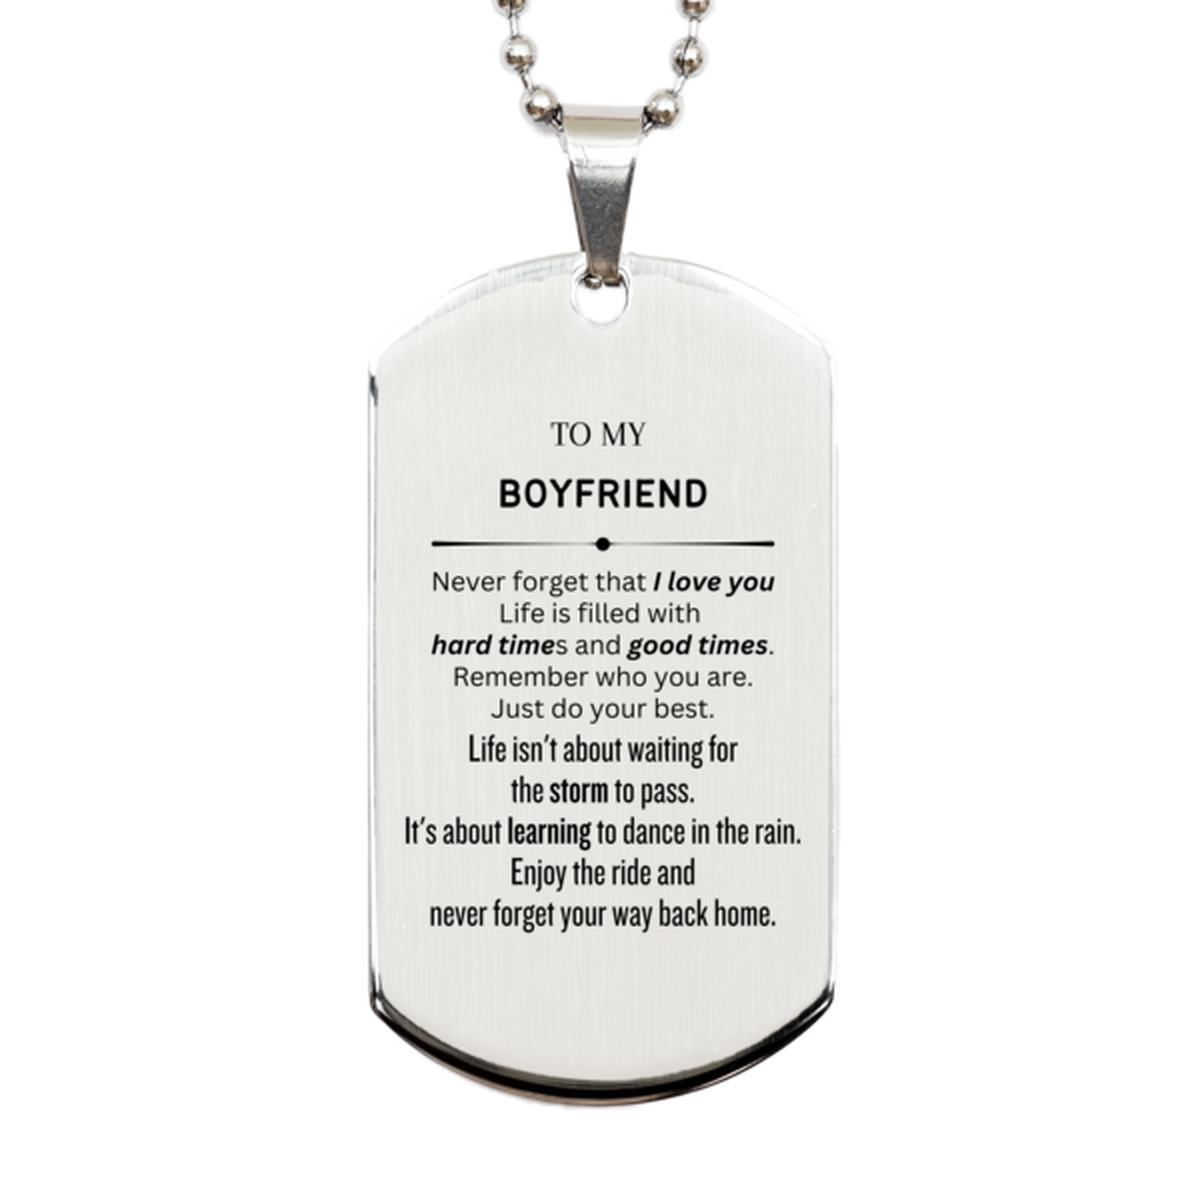 Christmas Boyfriend Silver Dog Tag Gifts, To My Boyfriend Birthday Thank You Gifts For Boyfriend, Graduation Unique Gifts For Boyfriend To My Boyfriend Never forget that I love you life is filled with hard times and good times. Remember who you are. Just